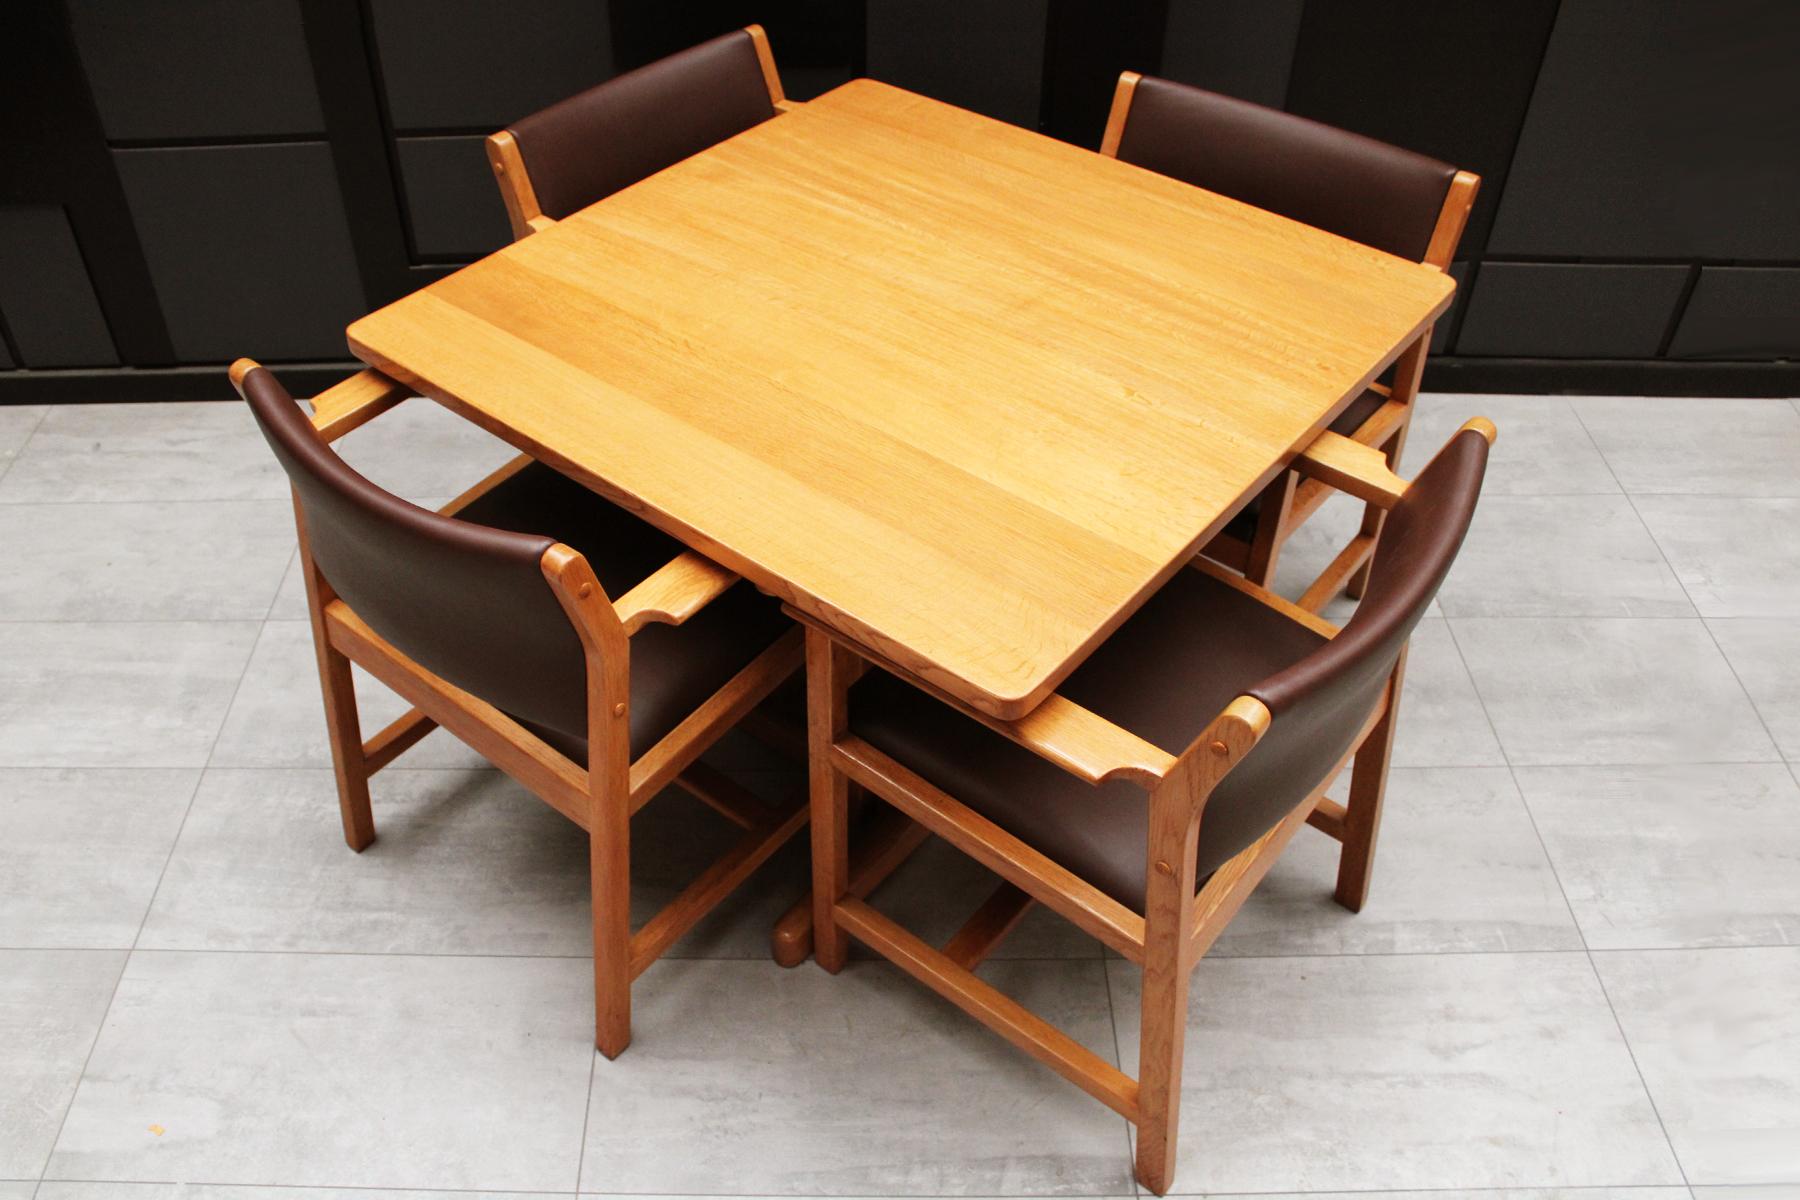 A Mid-Century Modern Danish oak 4-seat dining set dating from circa 1964 by Børge Mogensen for Fredericia Stolefabrik that is perfect for a compact dining area.

The set features a solid oak Shaker Style square table with an offset base and 4 oak